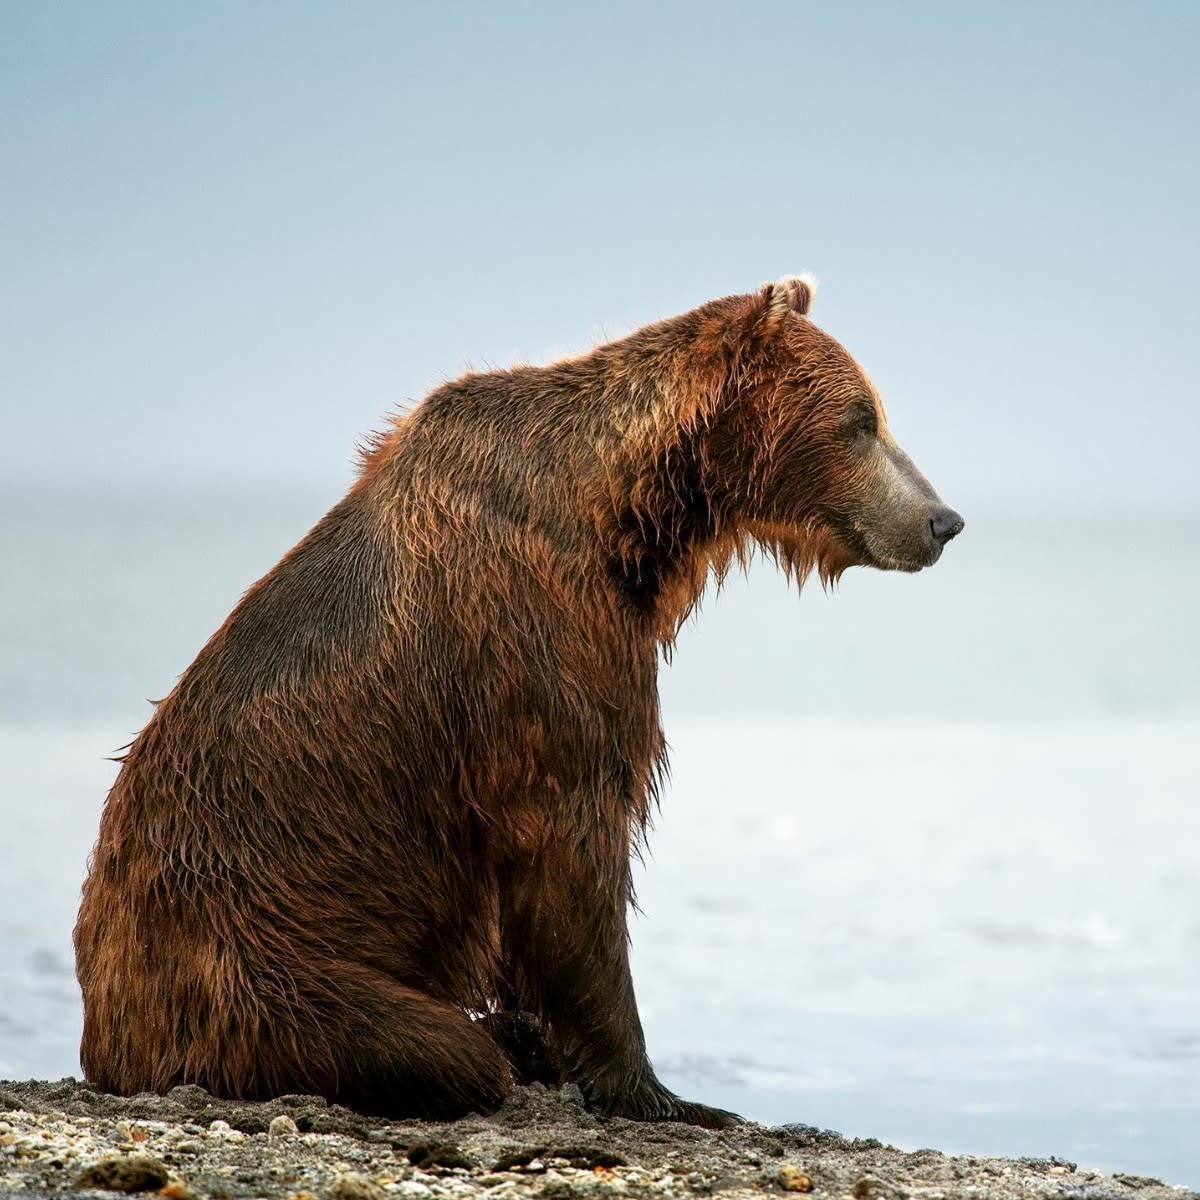 Taking a breather ⁣⁣ ⁣⁣ Kamchatka brown bears have access to rich food sources like salmon, pine nuts and berries so it's no surprise that they can weigh over 600kg. EarthCapture by Venkat Krishnan